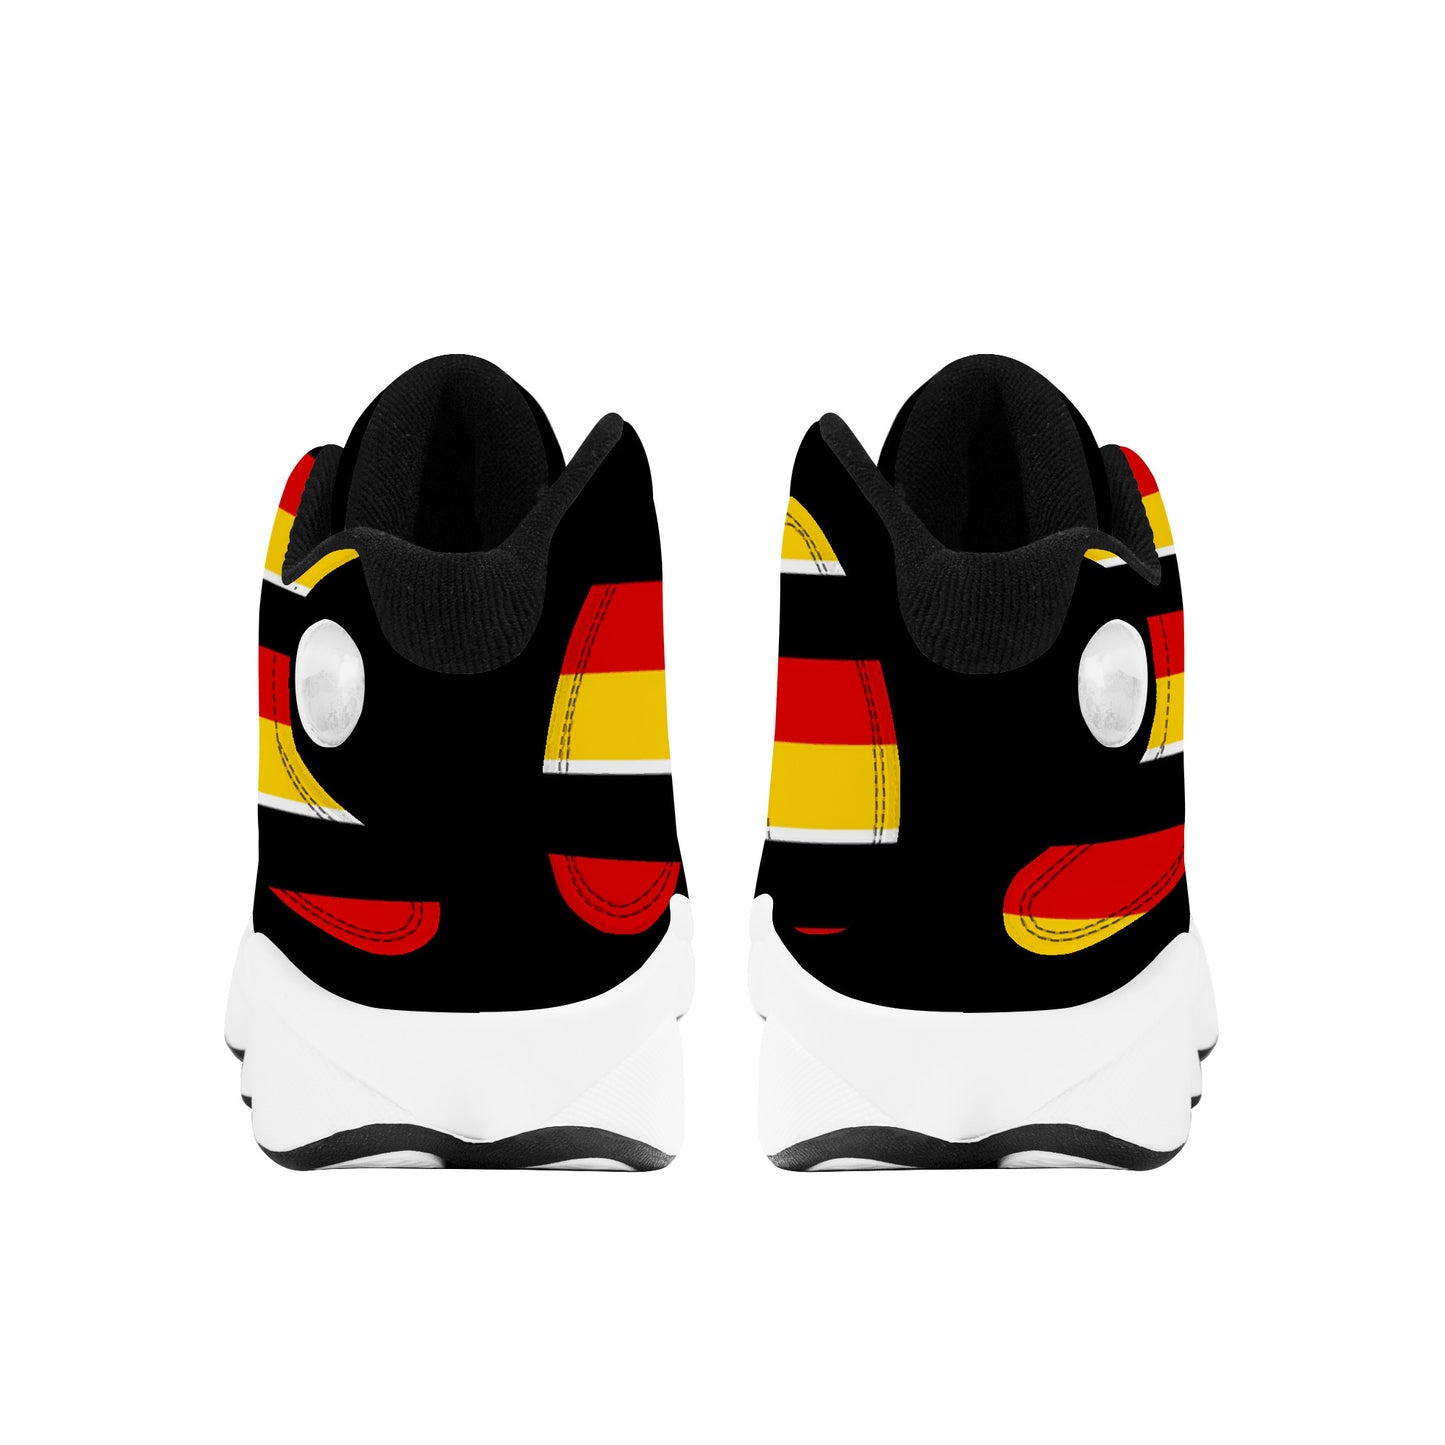 Basketball Shoes - Red/Black/Yellow